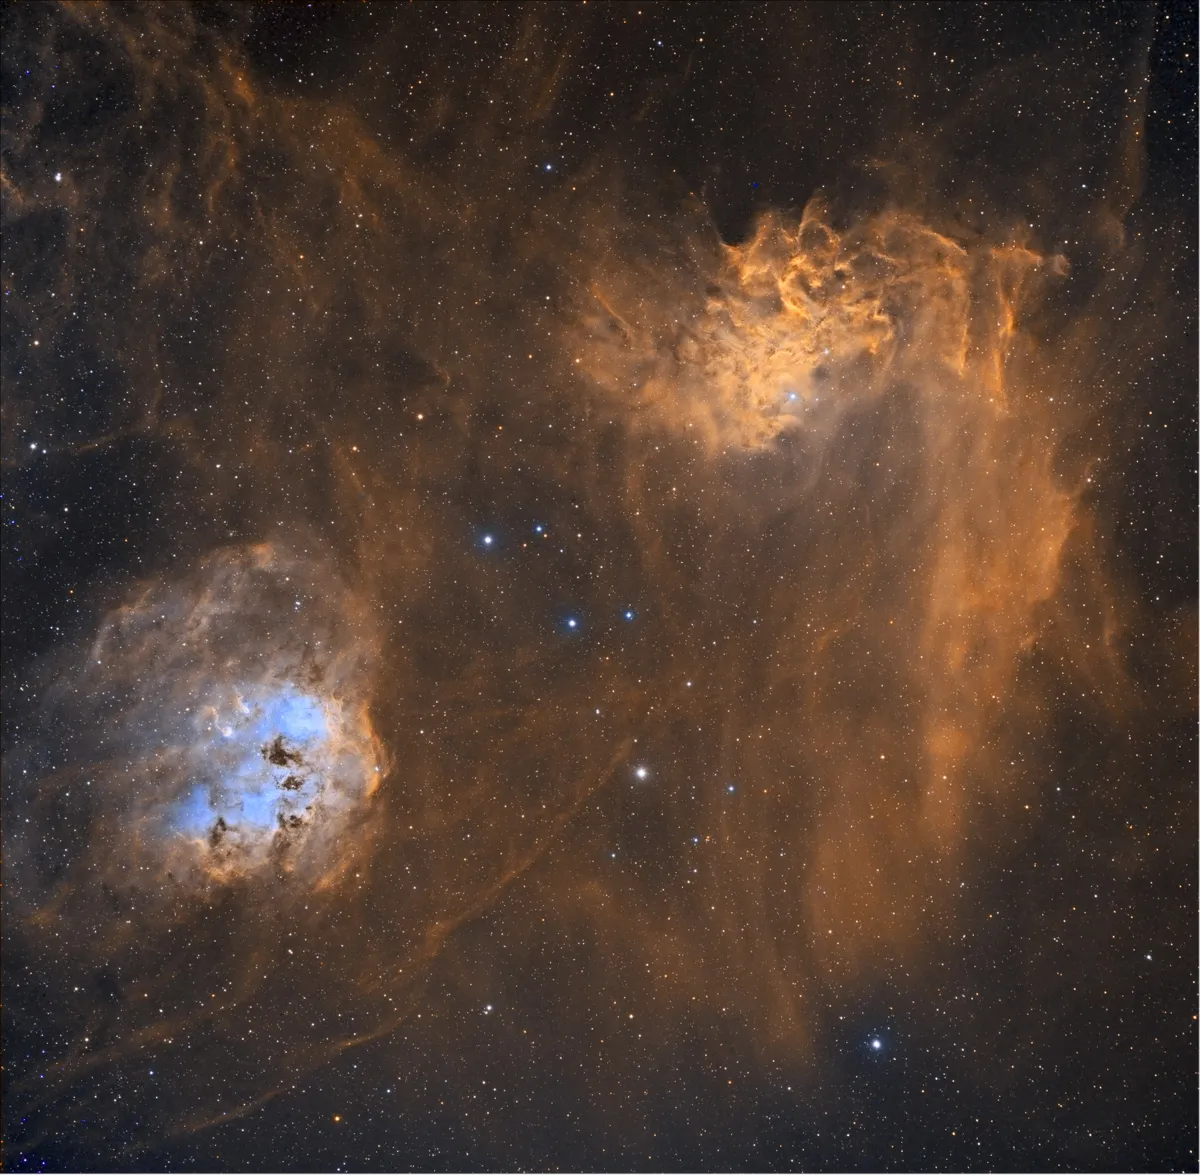 IC410 and Flaming Star Nebulas by Chris Heapy, Macclesfield, UK.